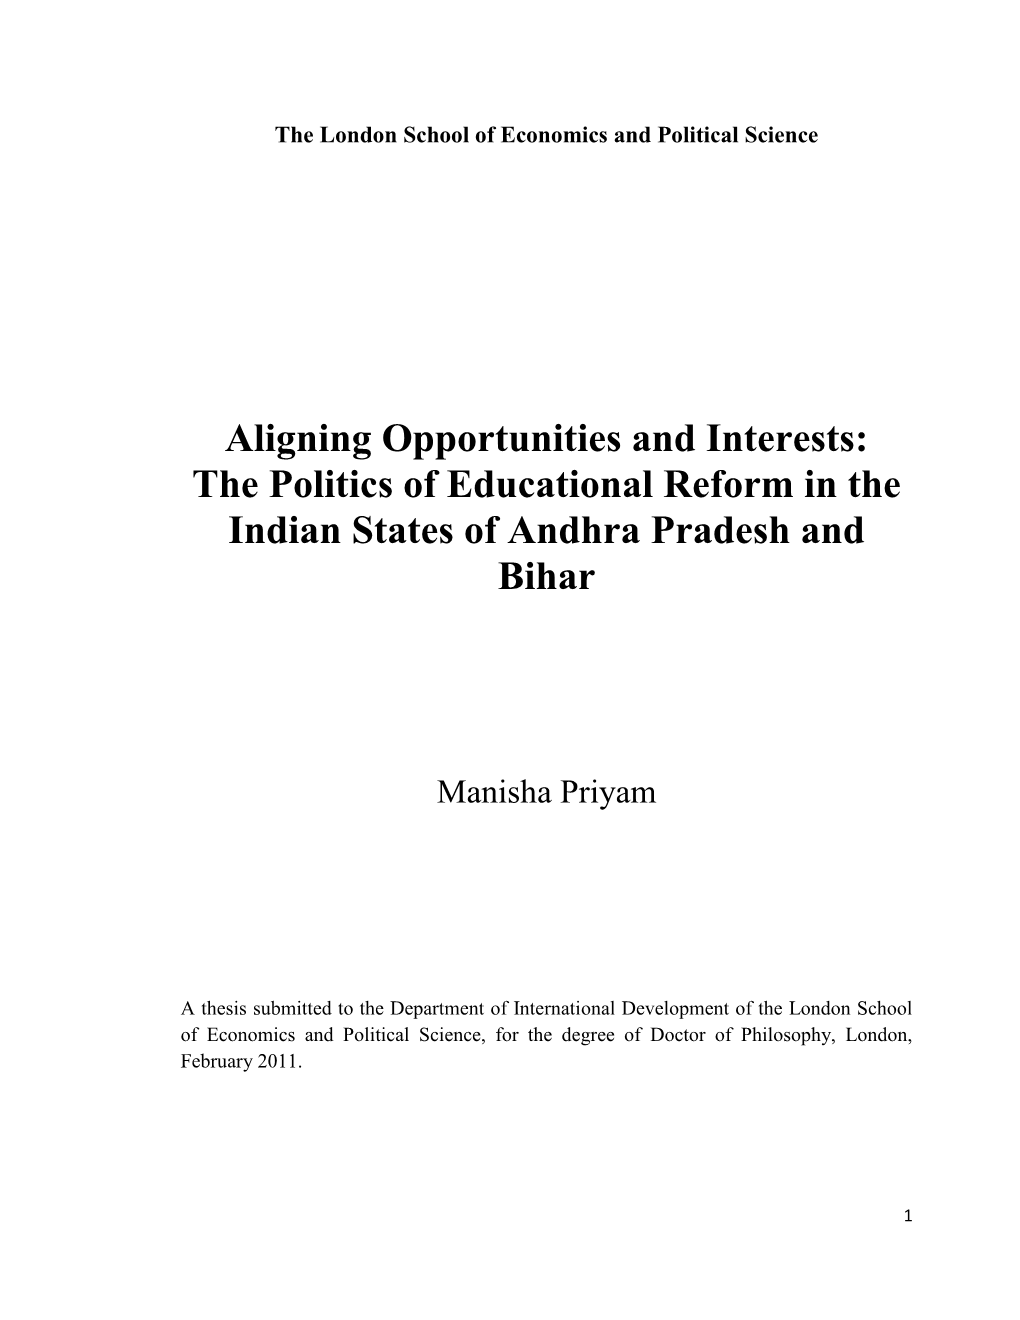 Aligning Opportunities and Interests: the Politics of Educational Reform in the Indian States of Andhra Pradesh and Bihar